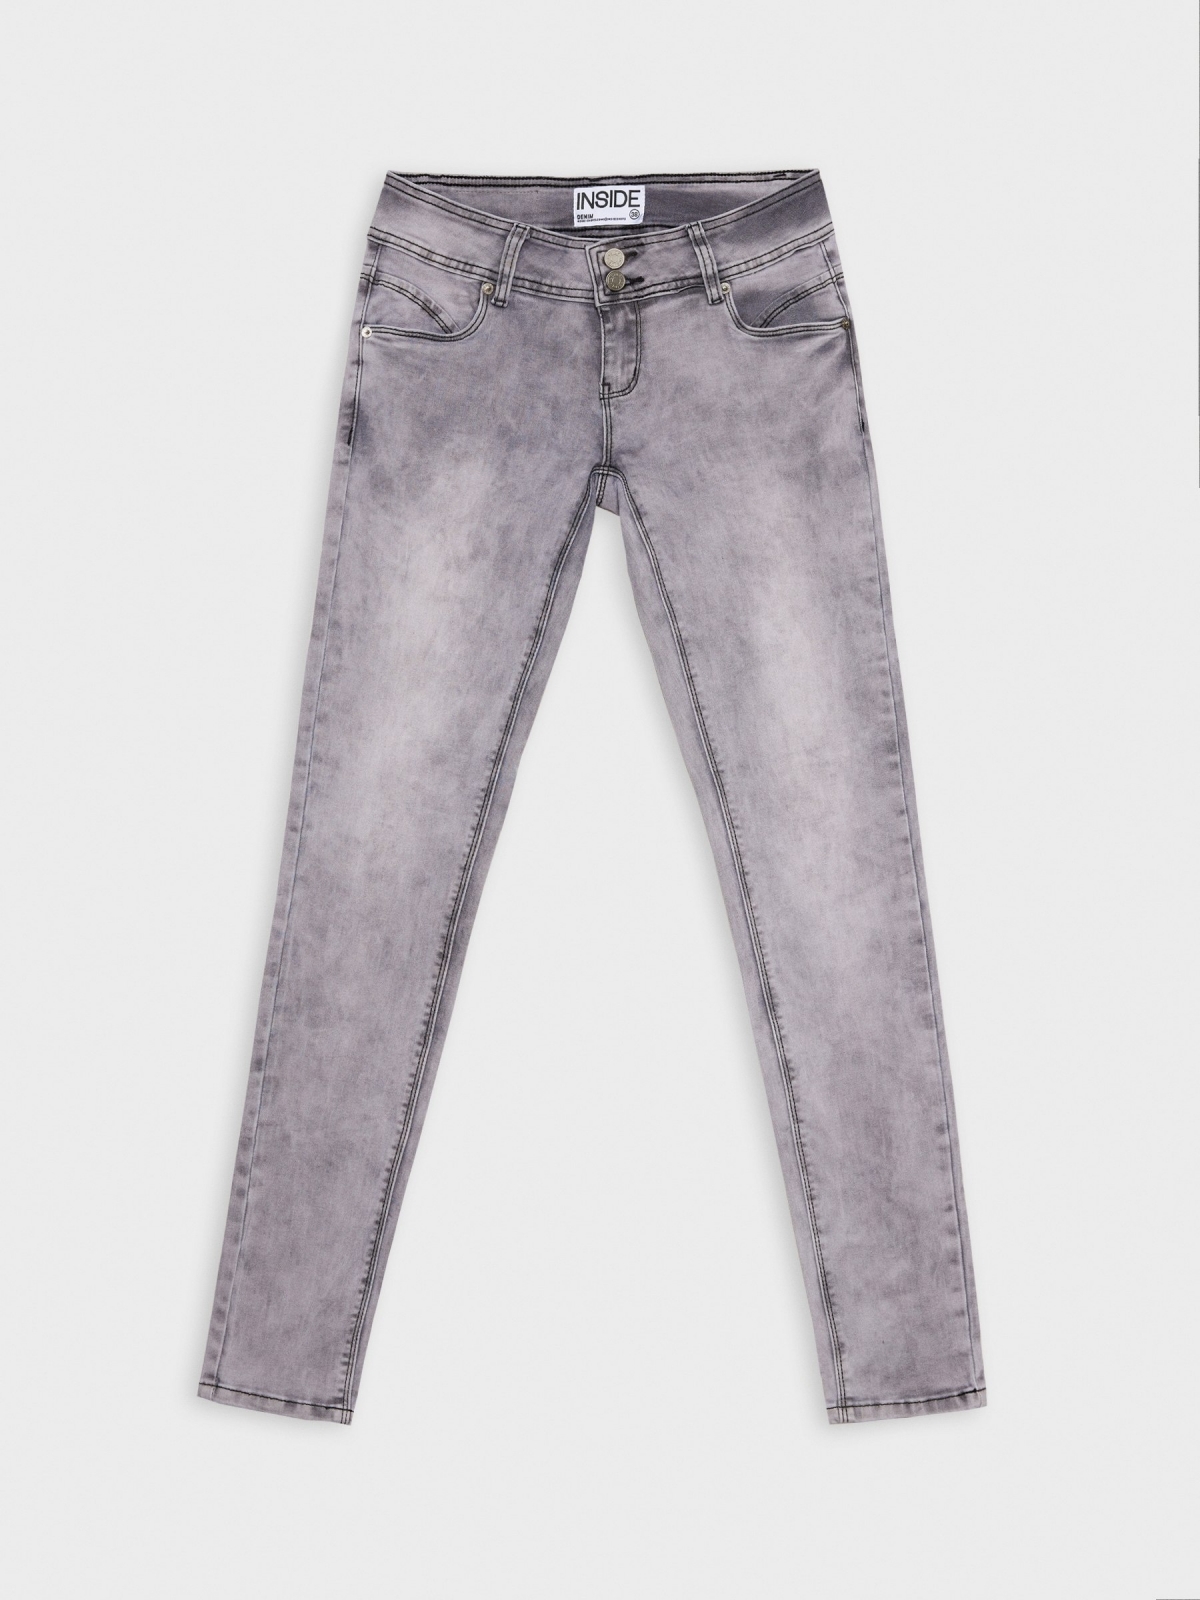  Low rise washed effect skinny jeans light grey